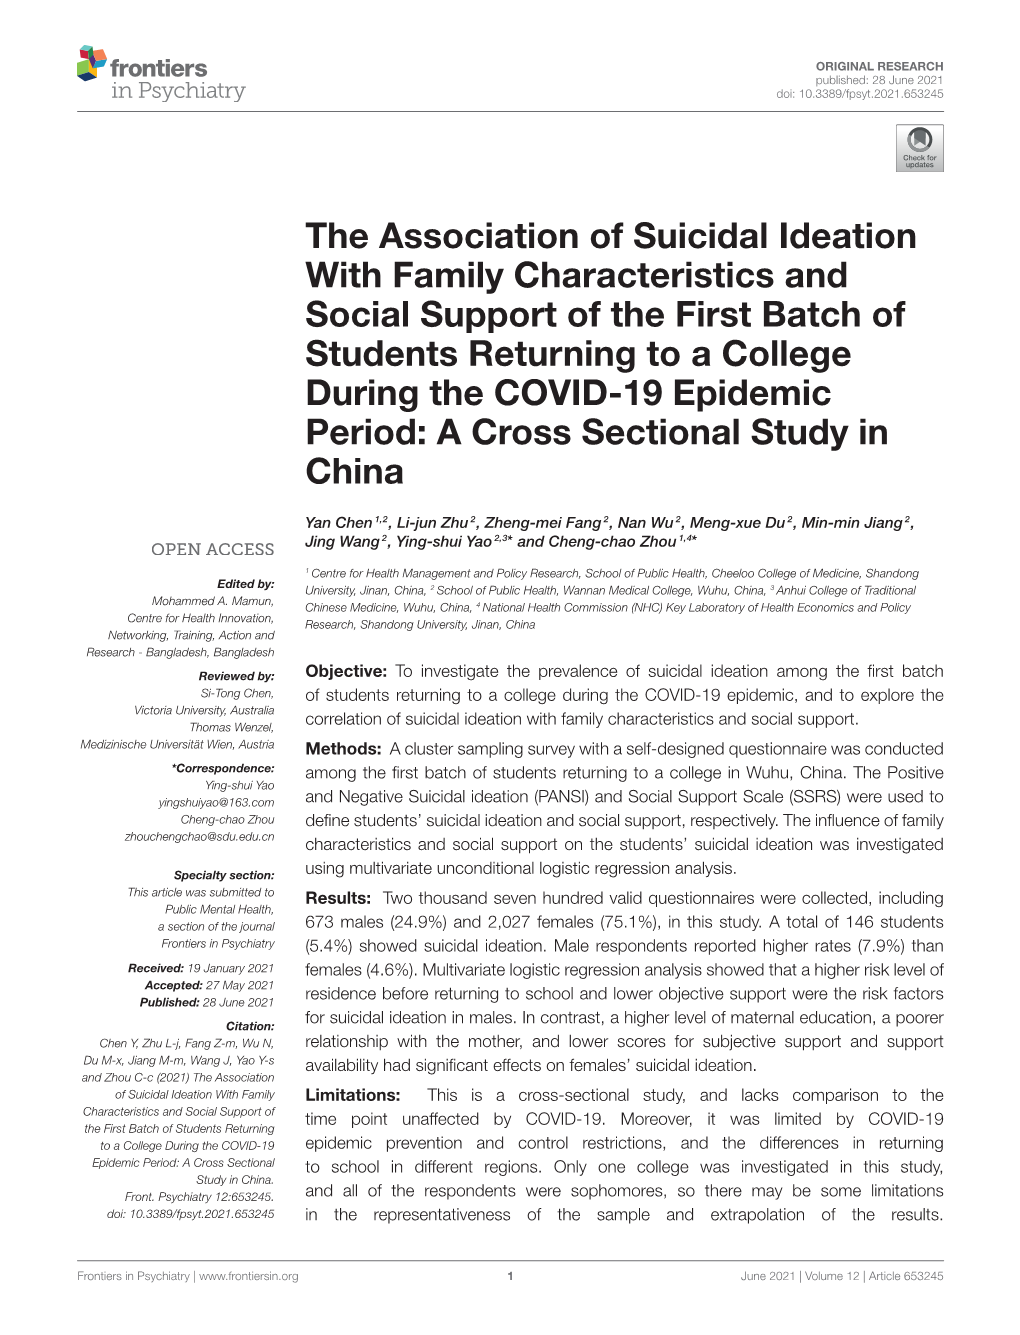 The Association of Suicidal Ideation with Family Characteristics And